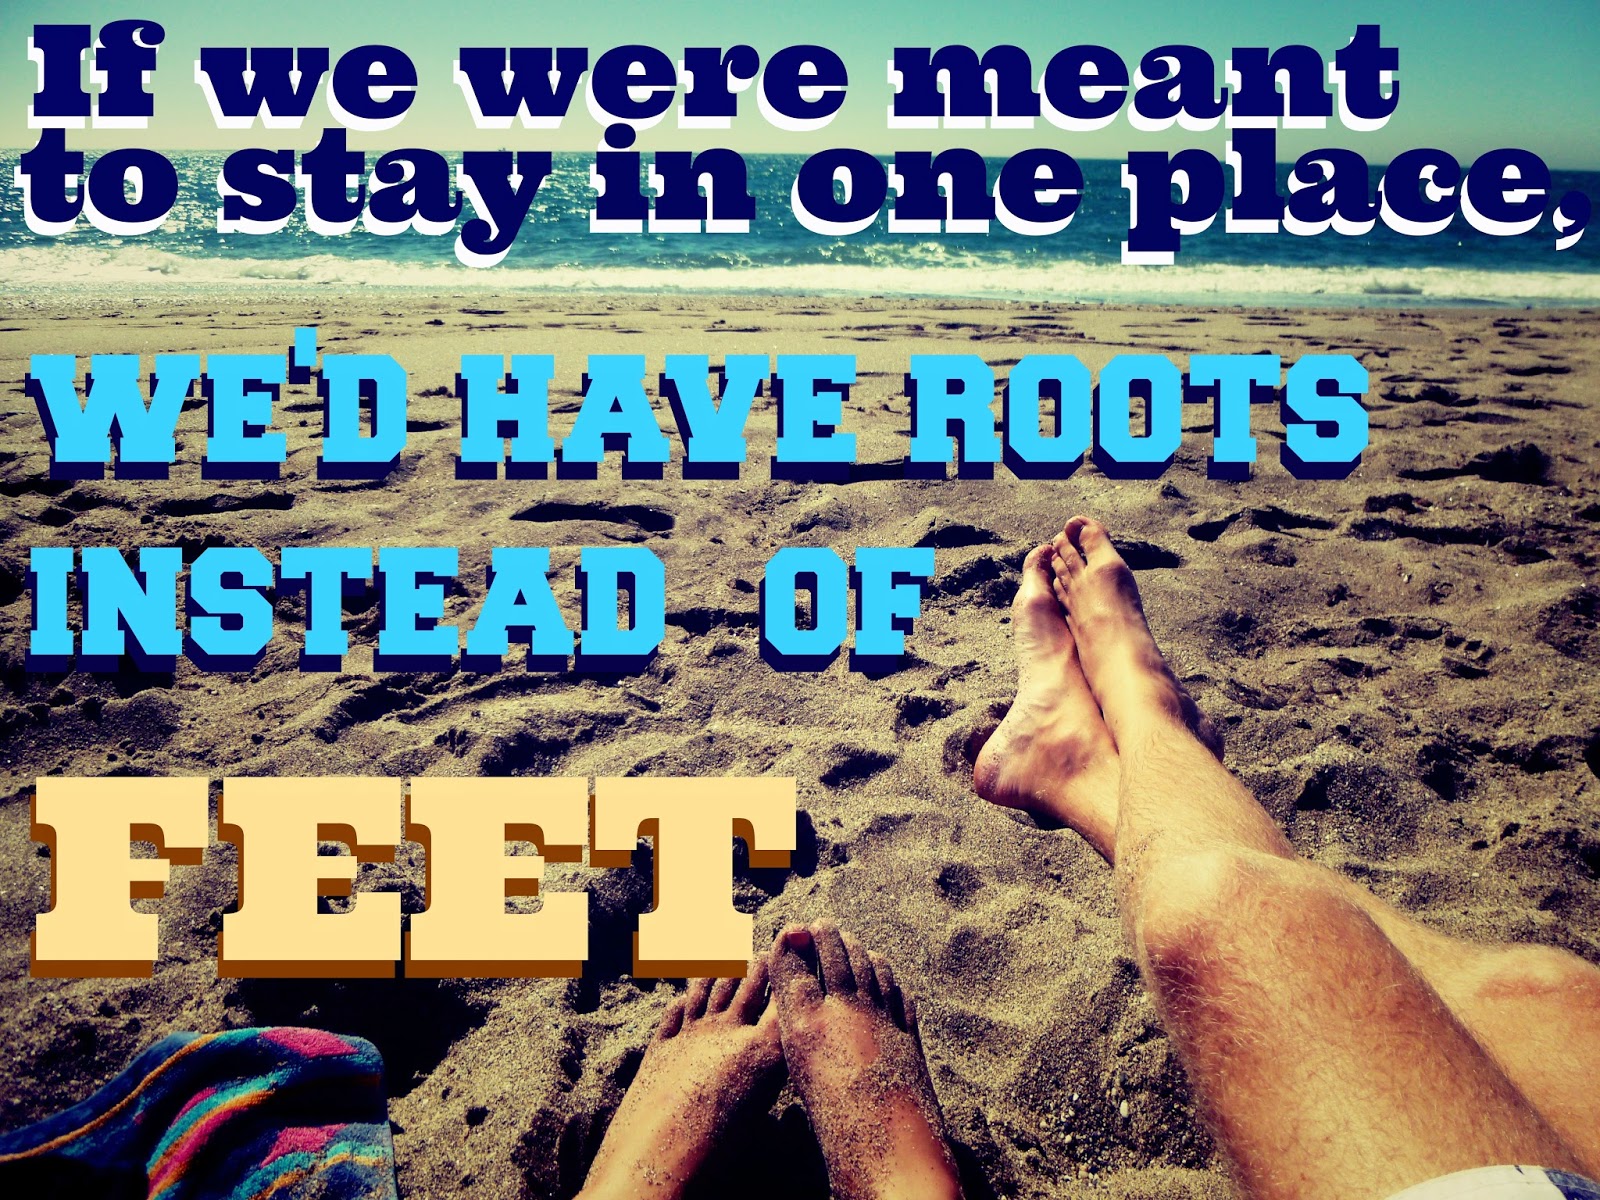 if we were meant to stay in one place we'd have roots instead of feet